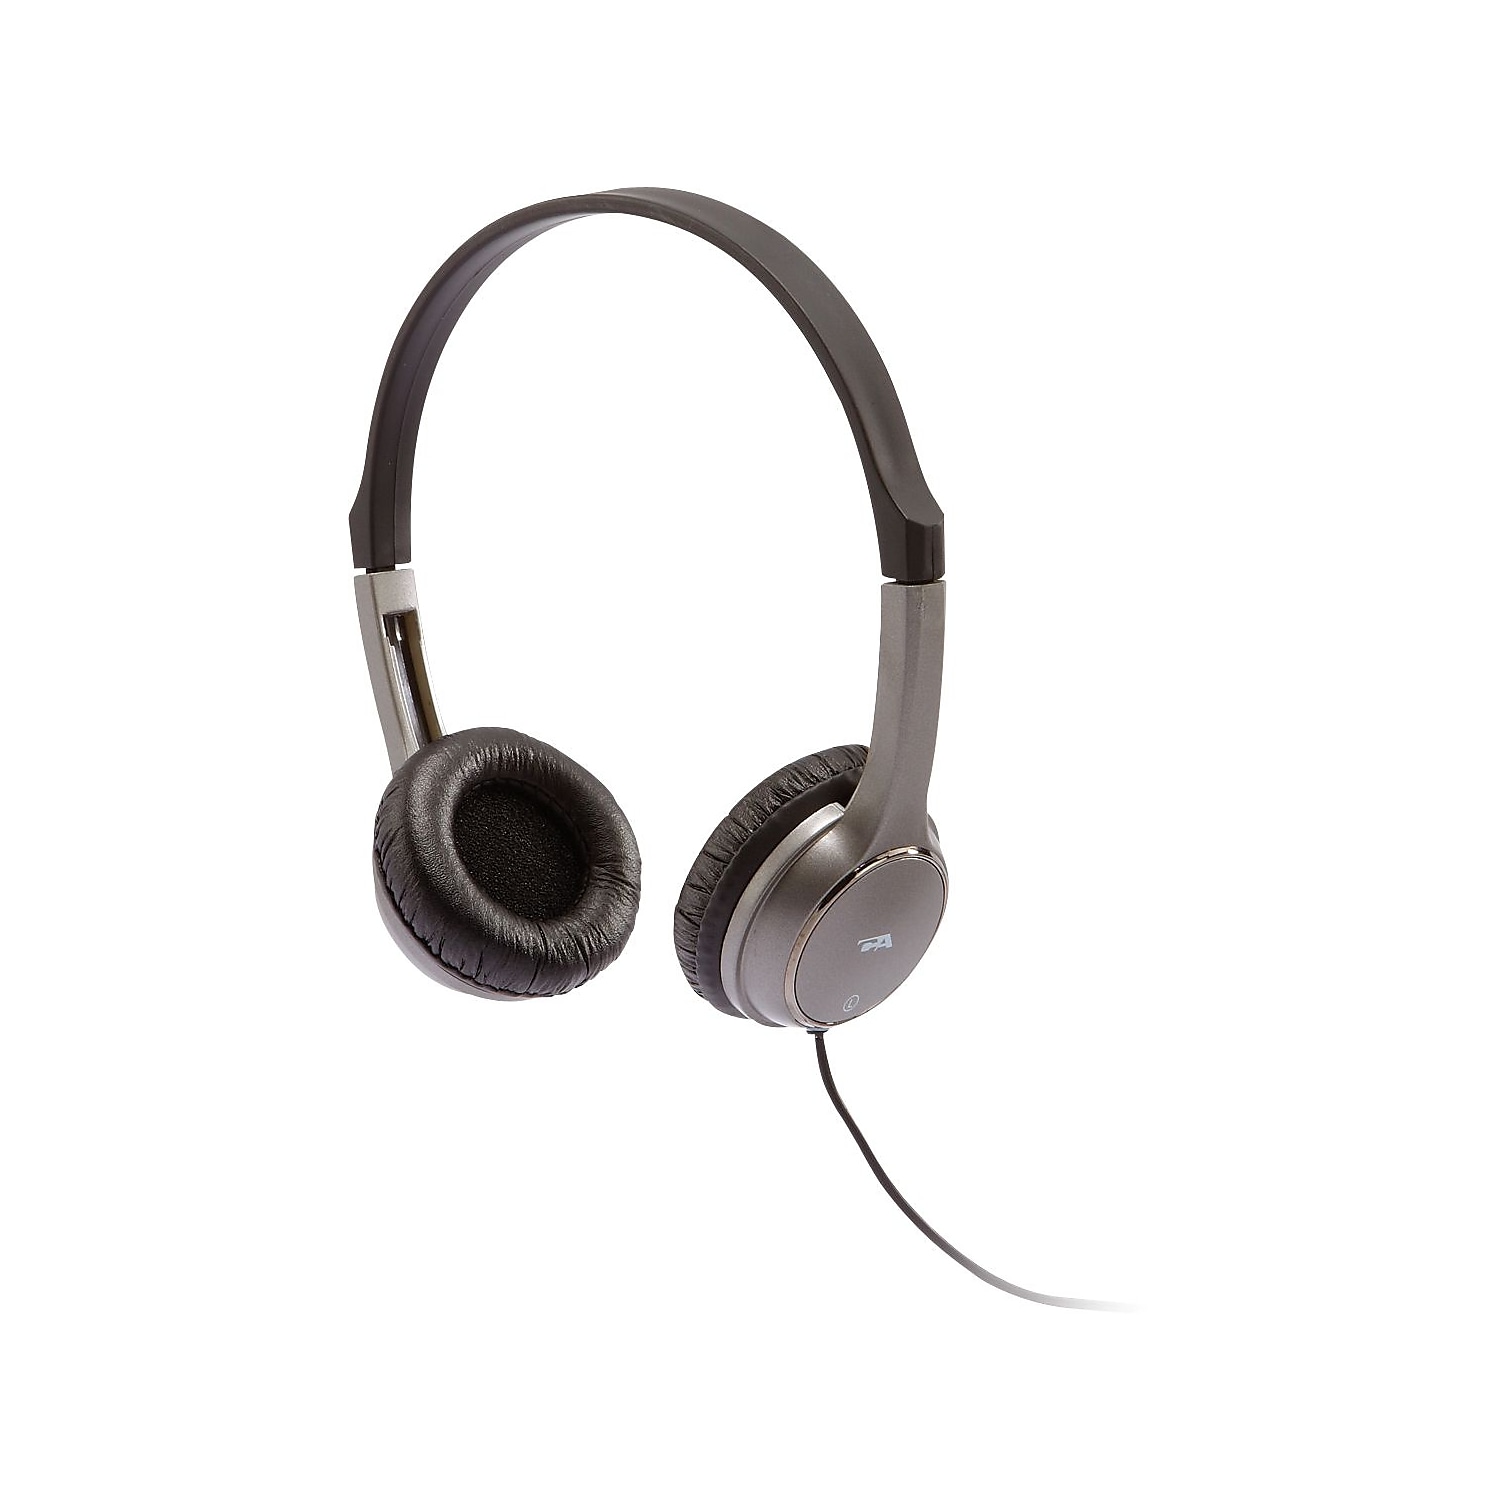 Cyber Acoustics Stereo Headphones for Kids, Gray - image 2 of 2